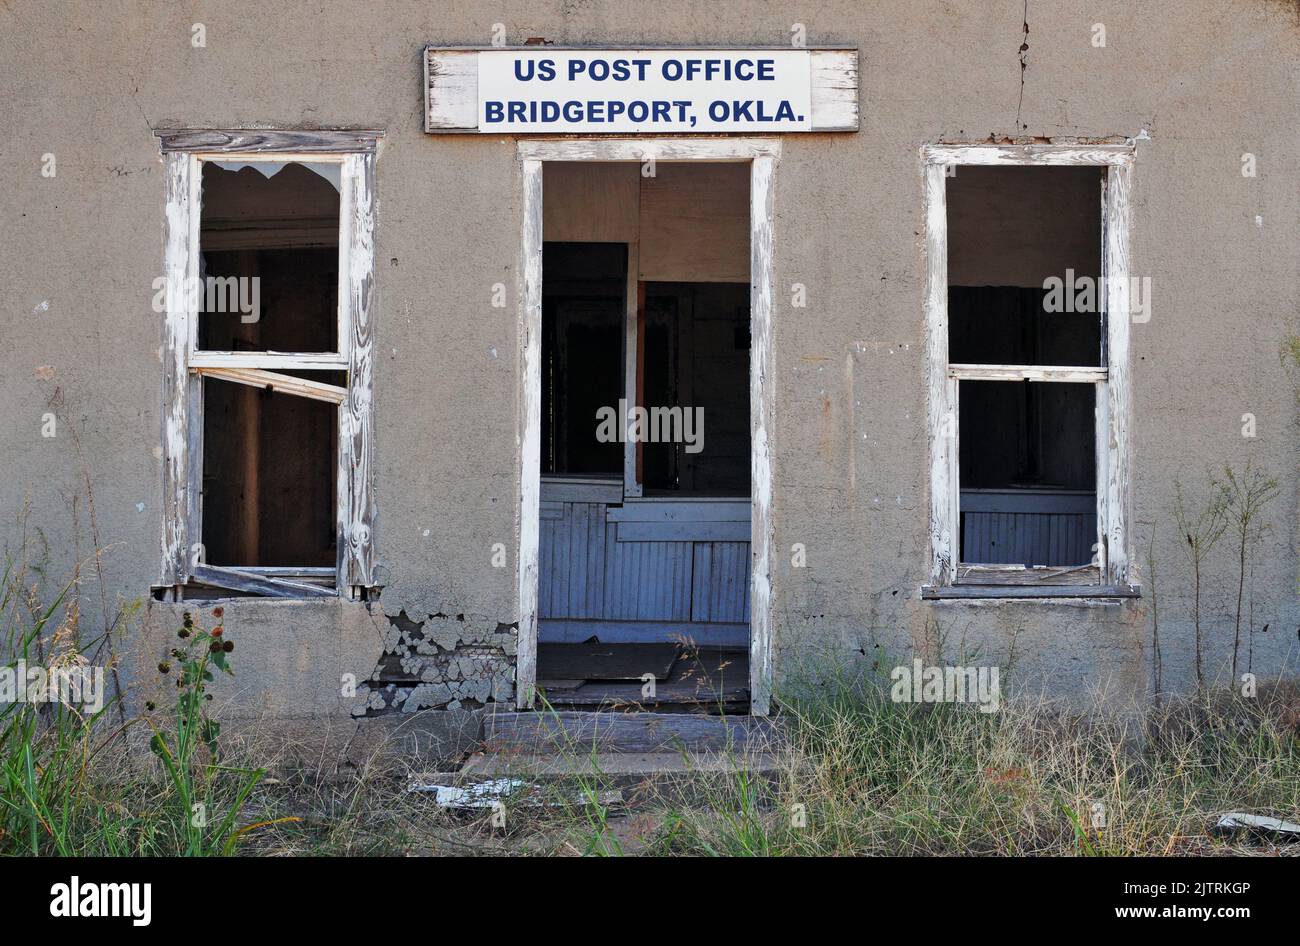 The abandoned post office building in Bridgeport, OK. The former Route 66 town was bypassed in 1934 when the historic road was realigned further south. Stock Photo